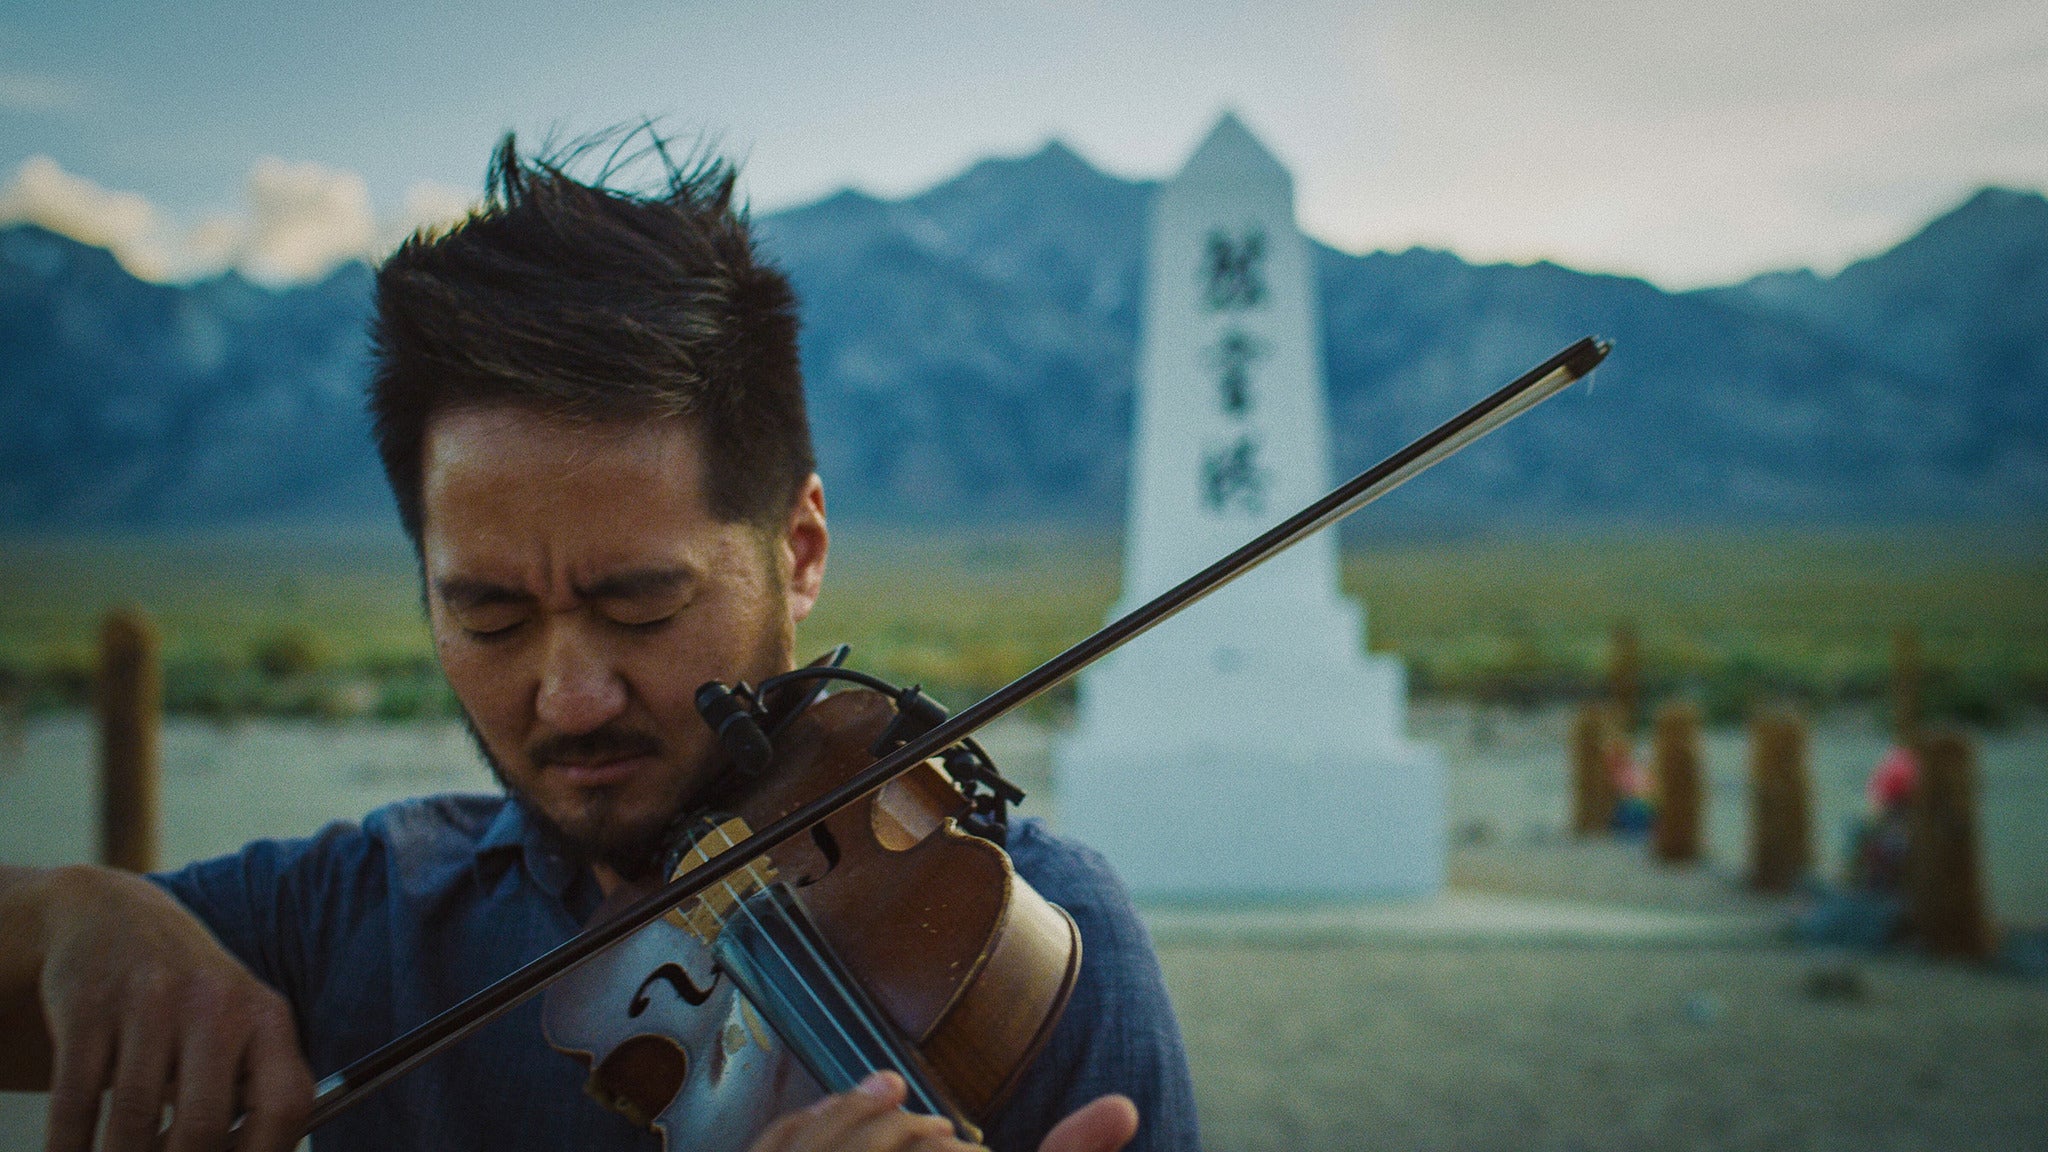 members only presale passcode for Kishi Bashi Presents His Song Film: Omoiyari affordable tickets in Washington at Lincoln Theatre